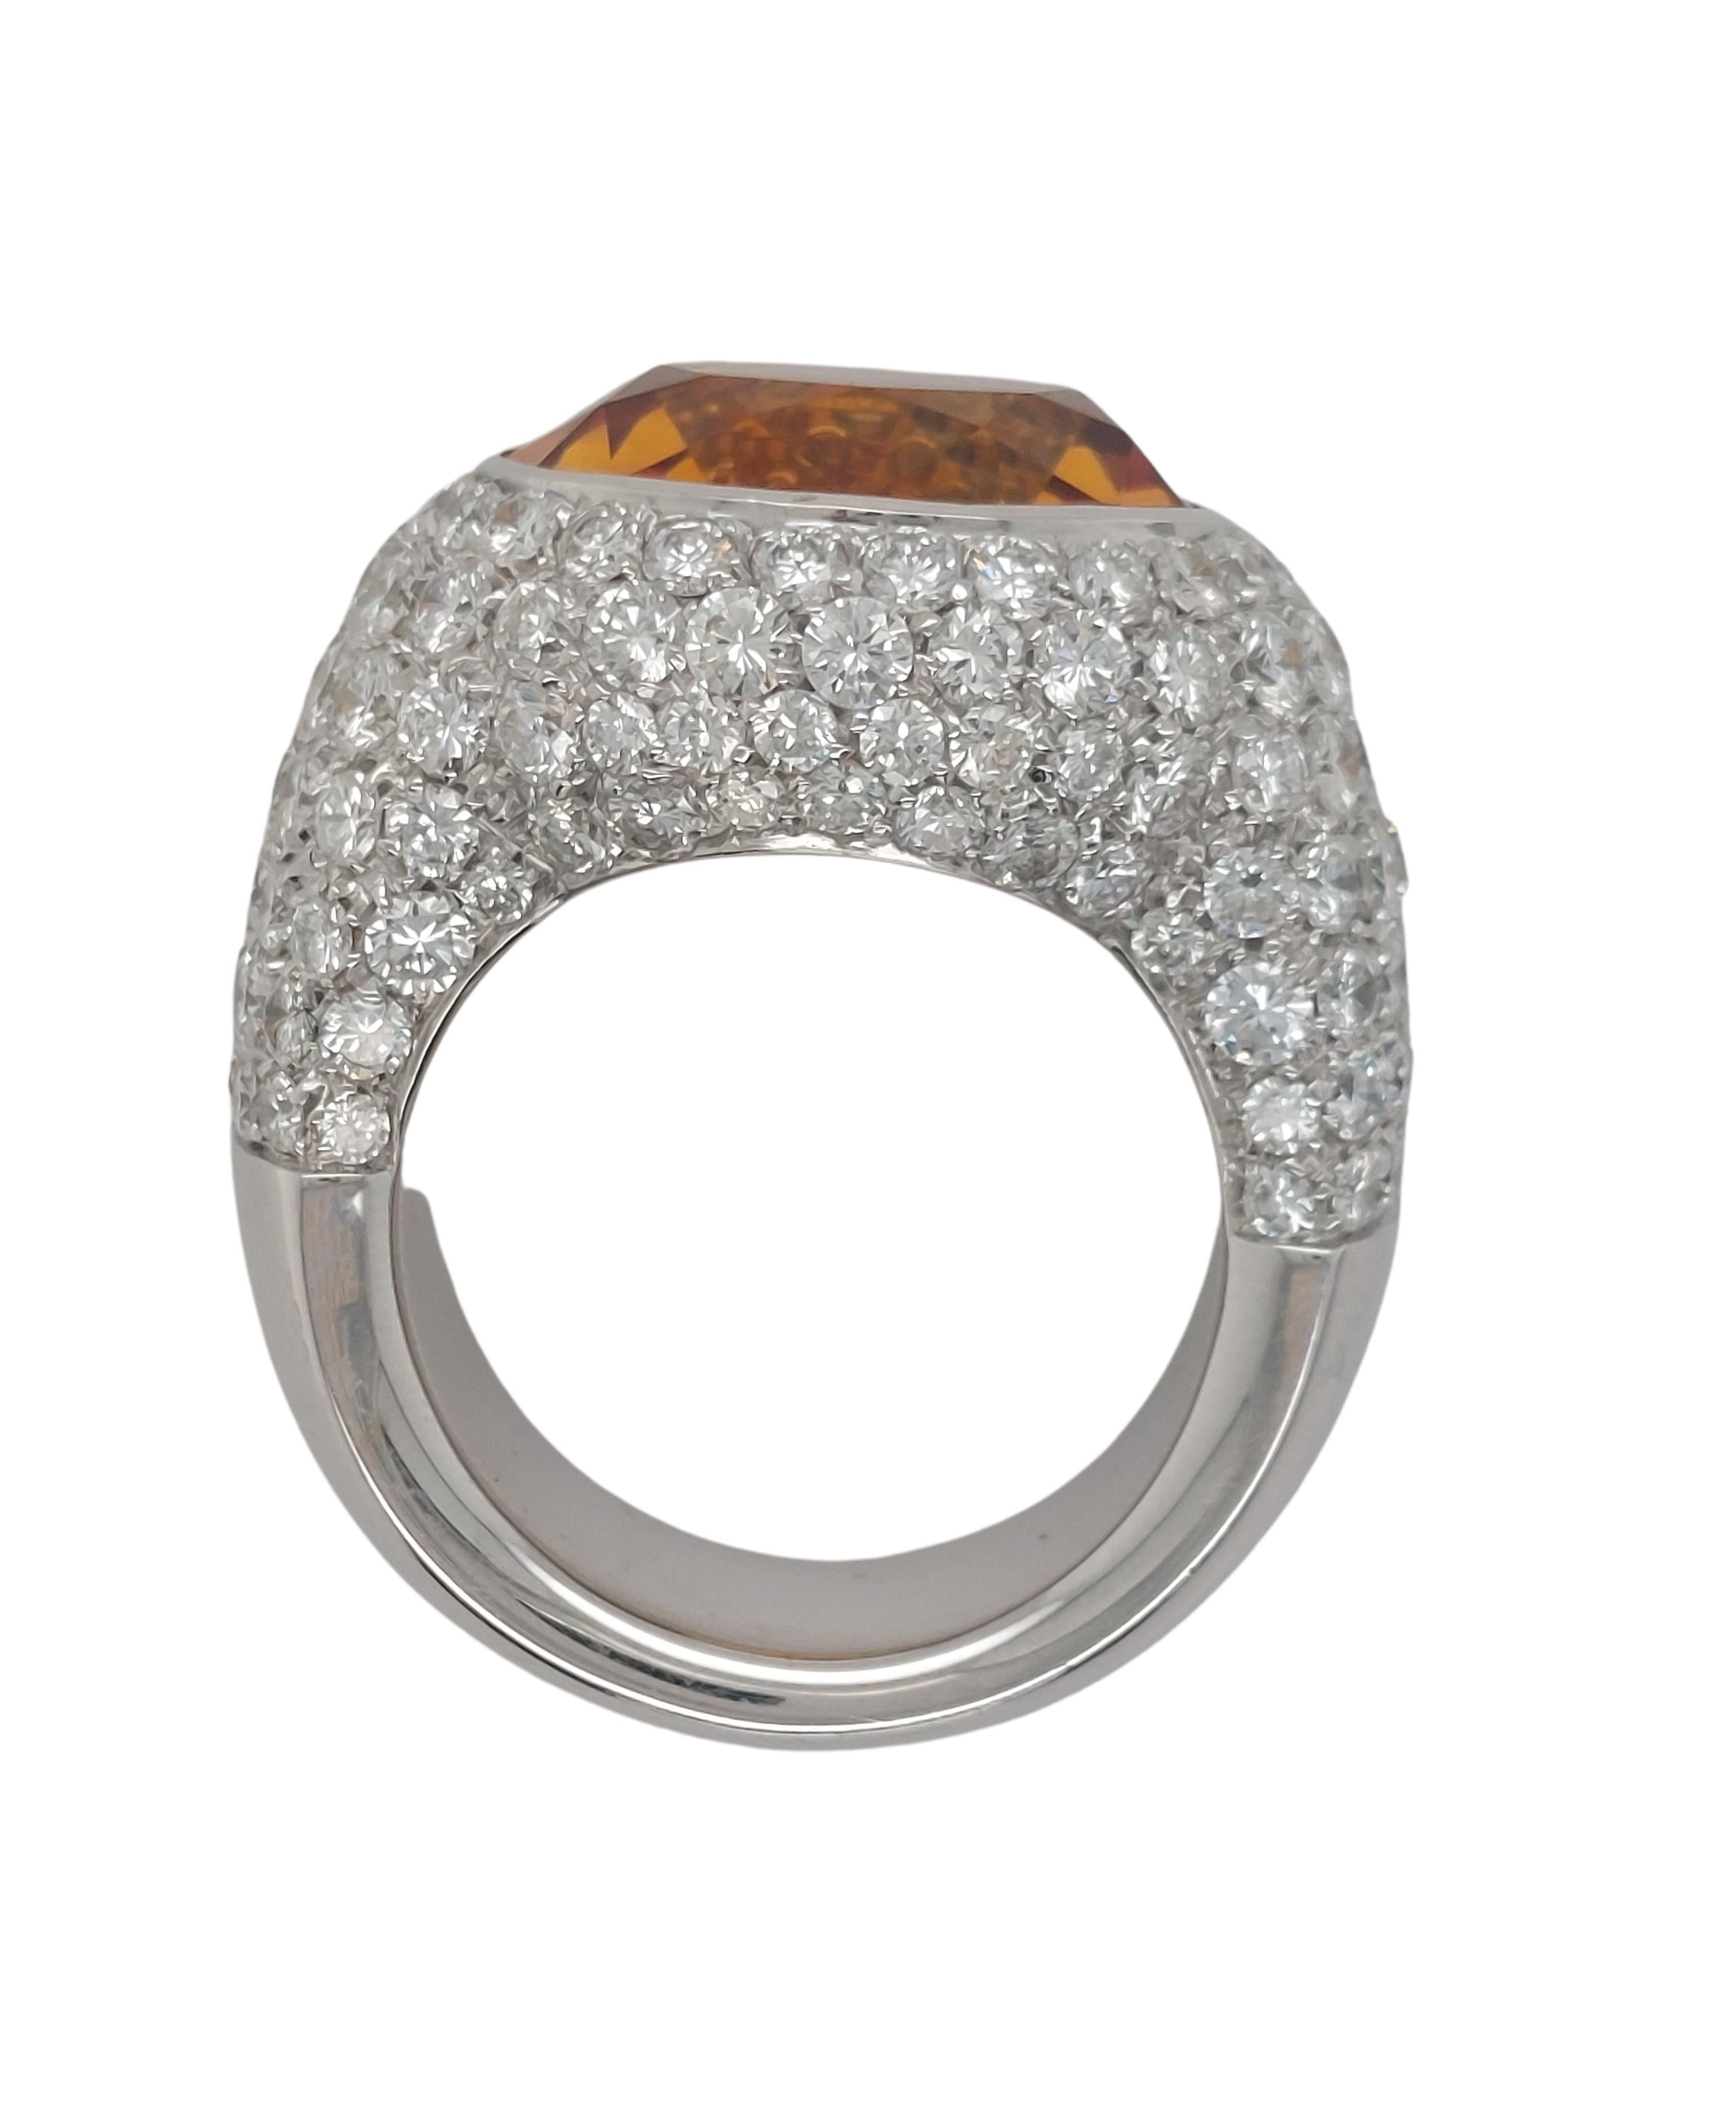 Women's or Men's Stunning 18kt Solid White Gold Ring with 6.4ct Diamonds and Big Citrine Stone For Sale